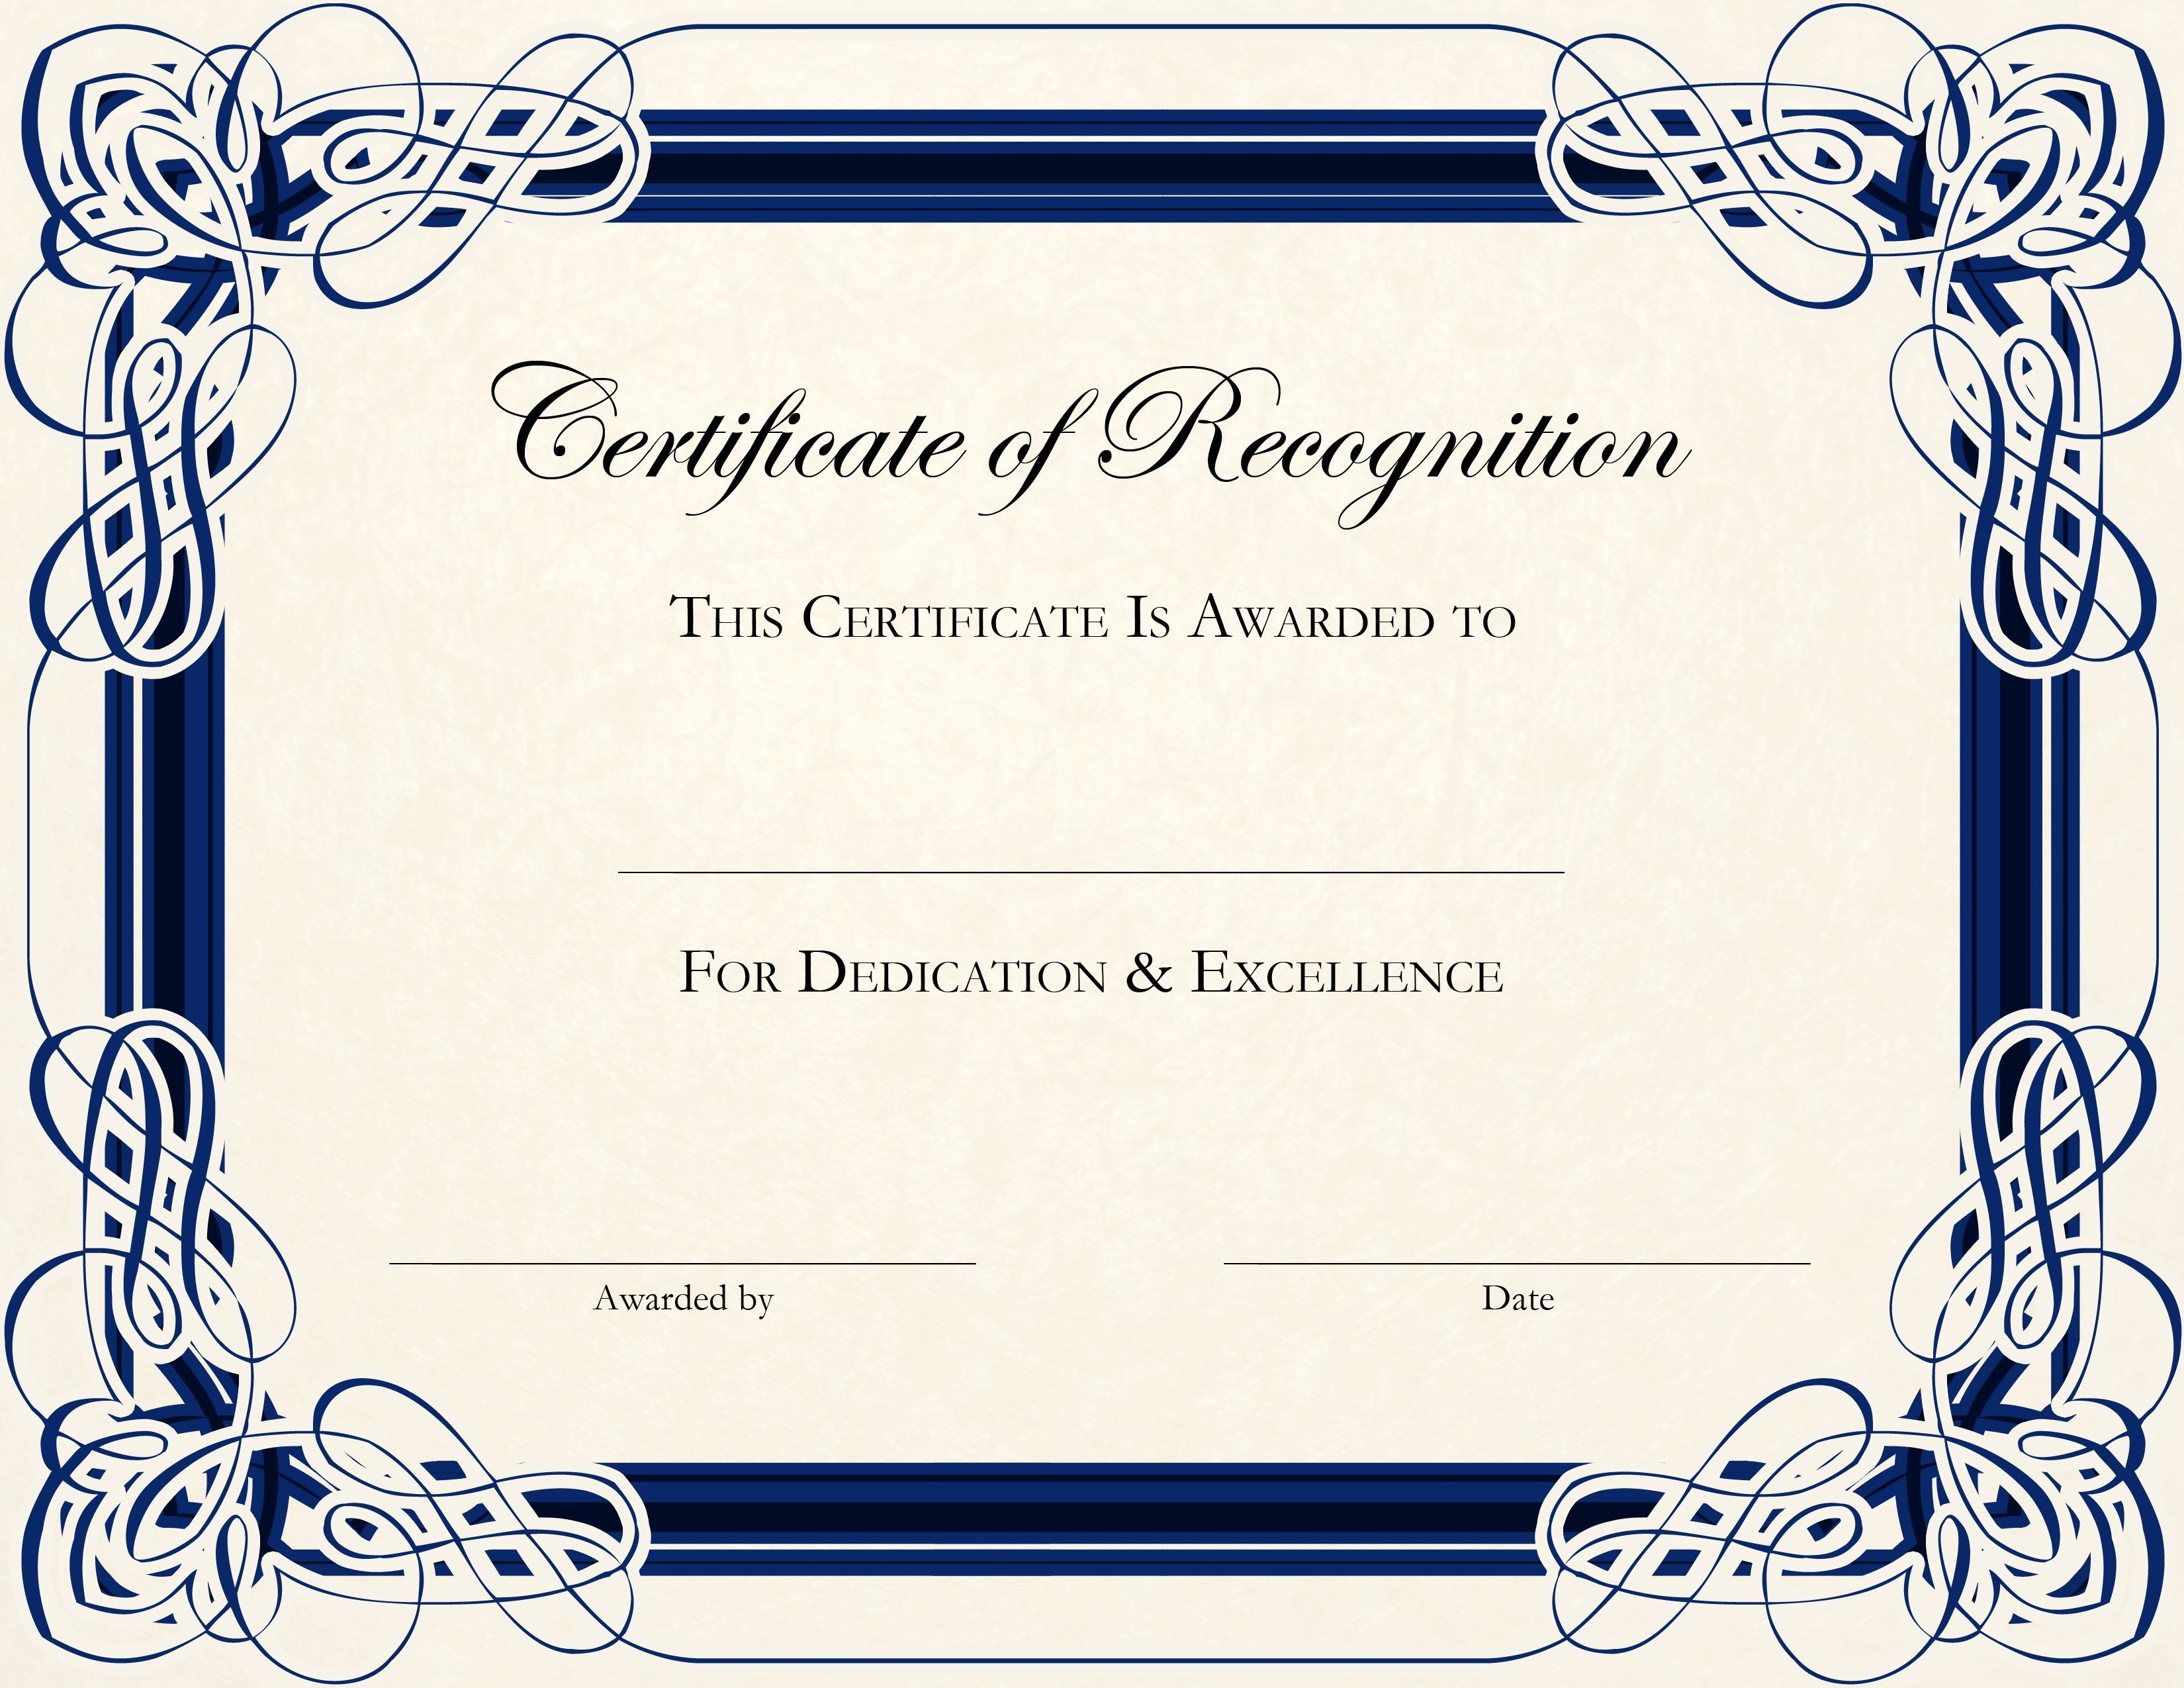 Printable Certificate Template  room surf.com Intended For Free Swimming Certificate Templates